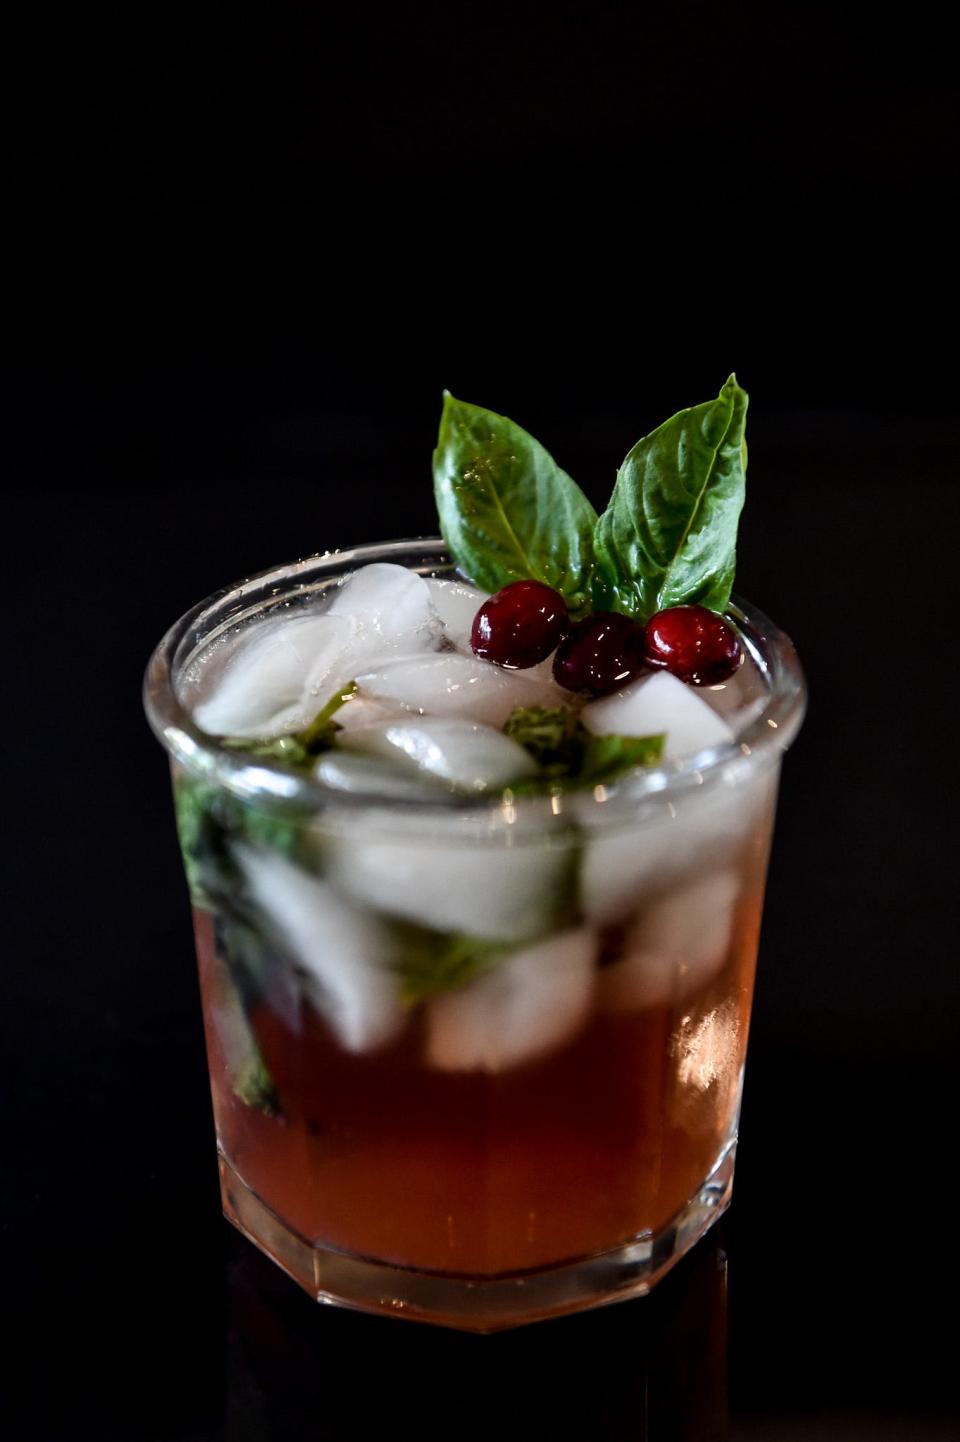 The 'Pomegranate Pines' cocktail is made with Mississippi-owned Wonderbird gin and has a fragrant edge from freshly muddled basil.